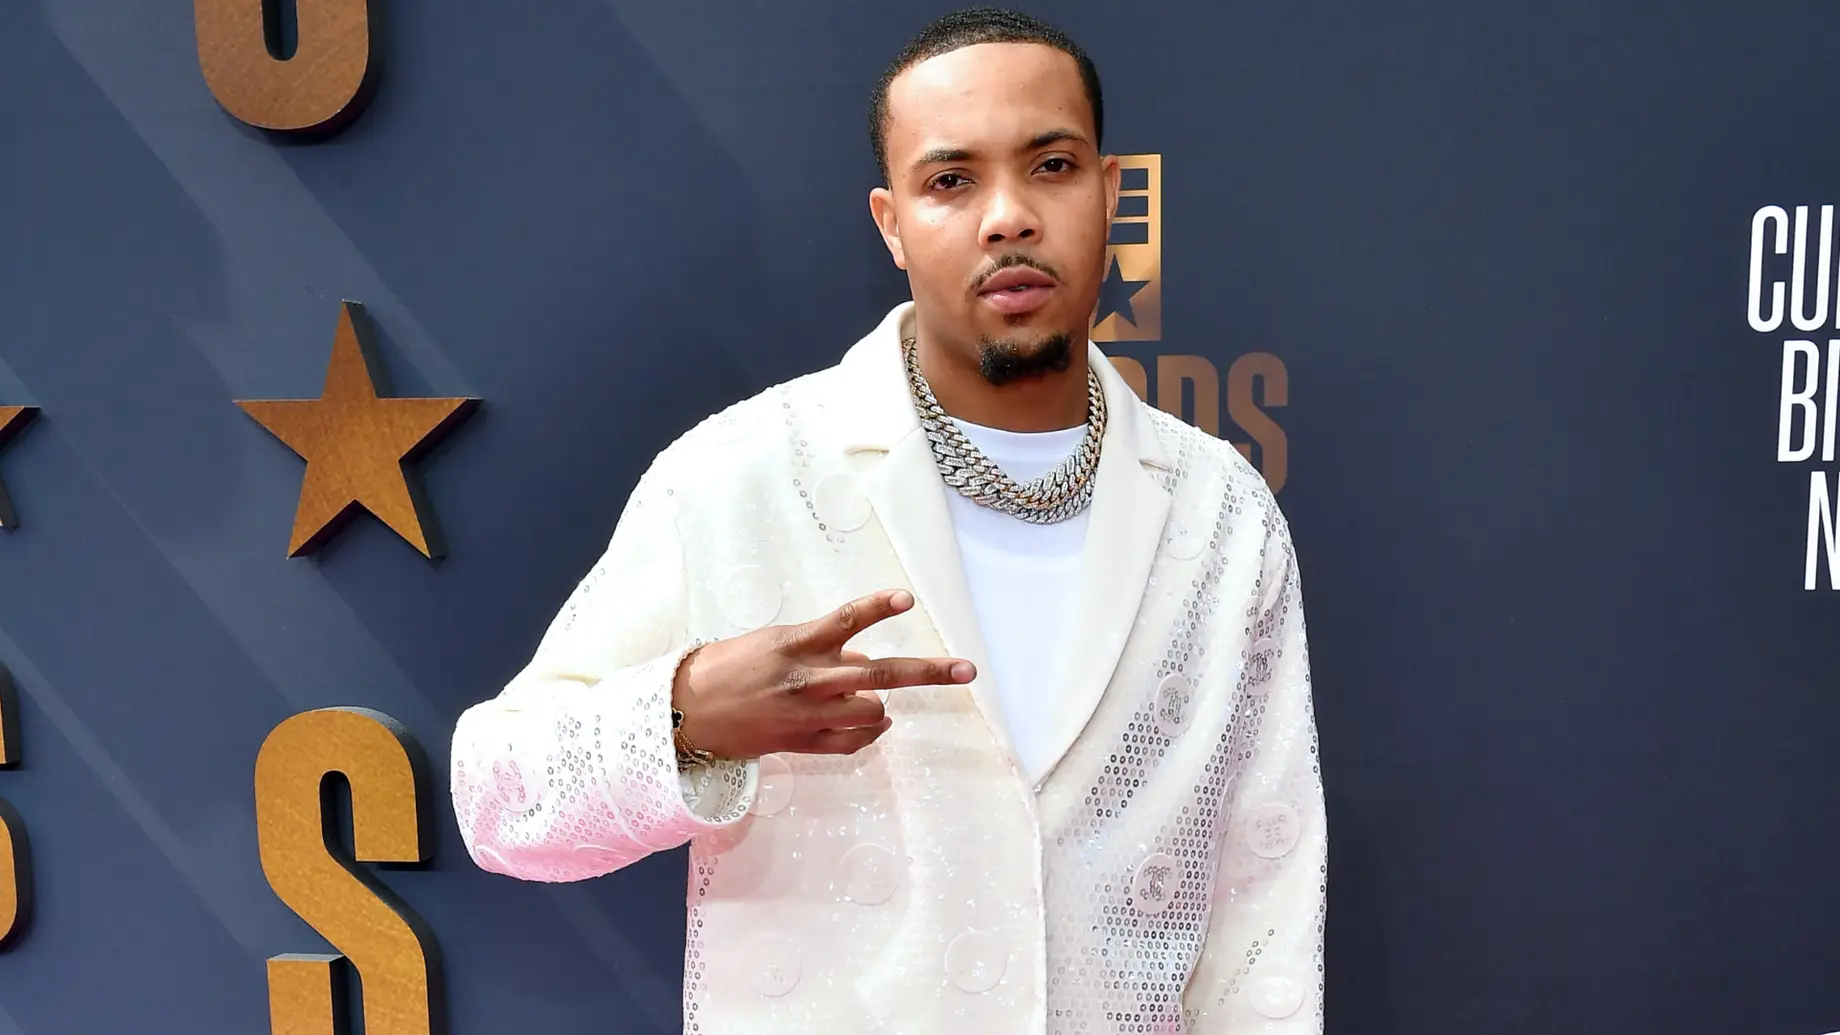 G Herbo Alleges He’s Owed $40 Million After ‘Unfair and One-Sided Deals’ With Ex-Manager and Label